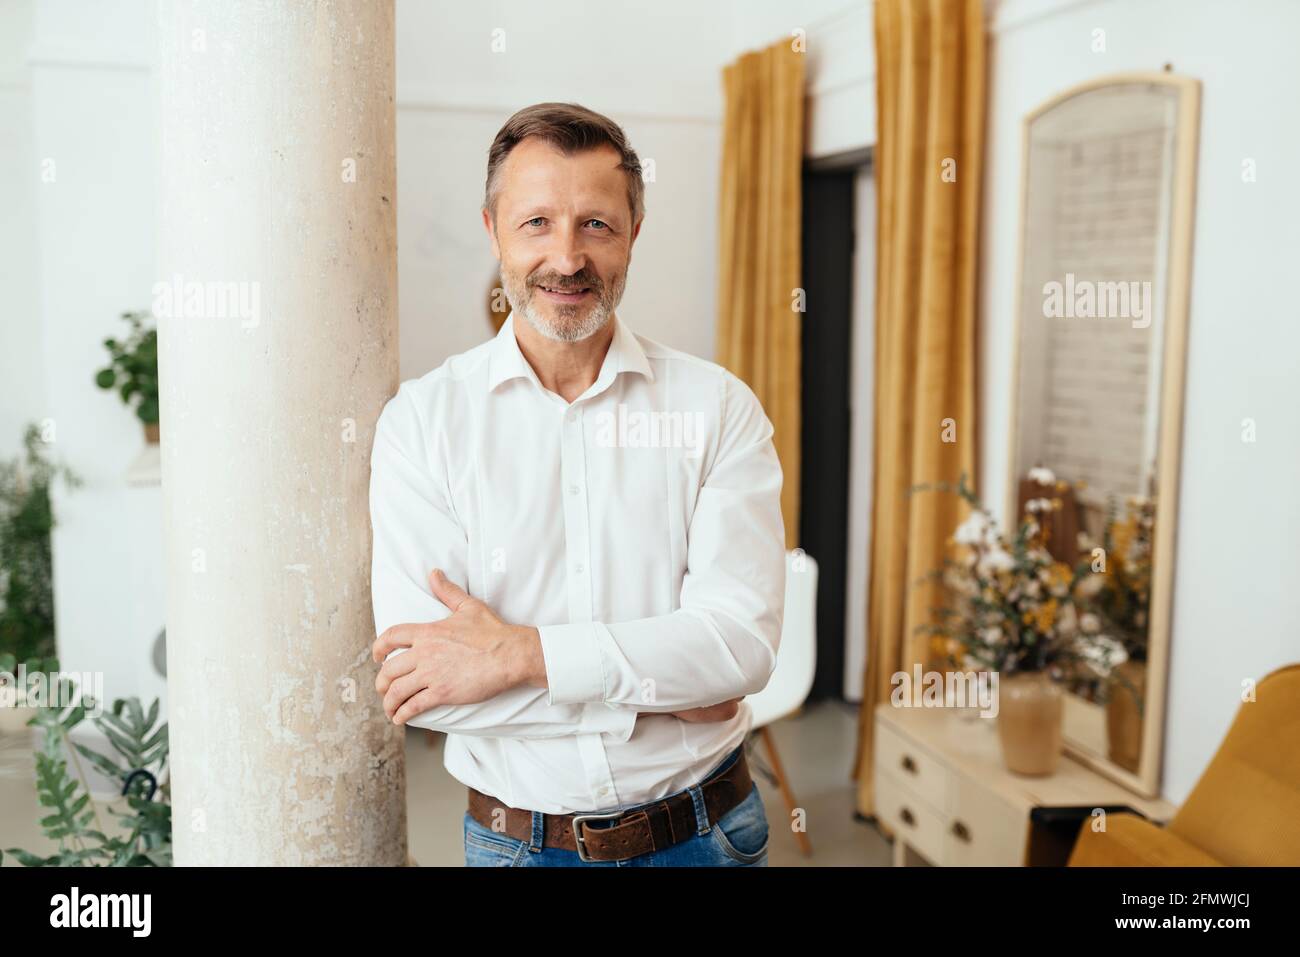 Confident relaxed man leaning on an interior cement pillar smiling at the camera with an intense expression as though listening Stock Photo